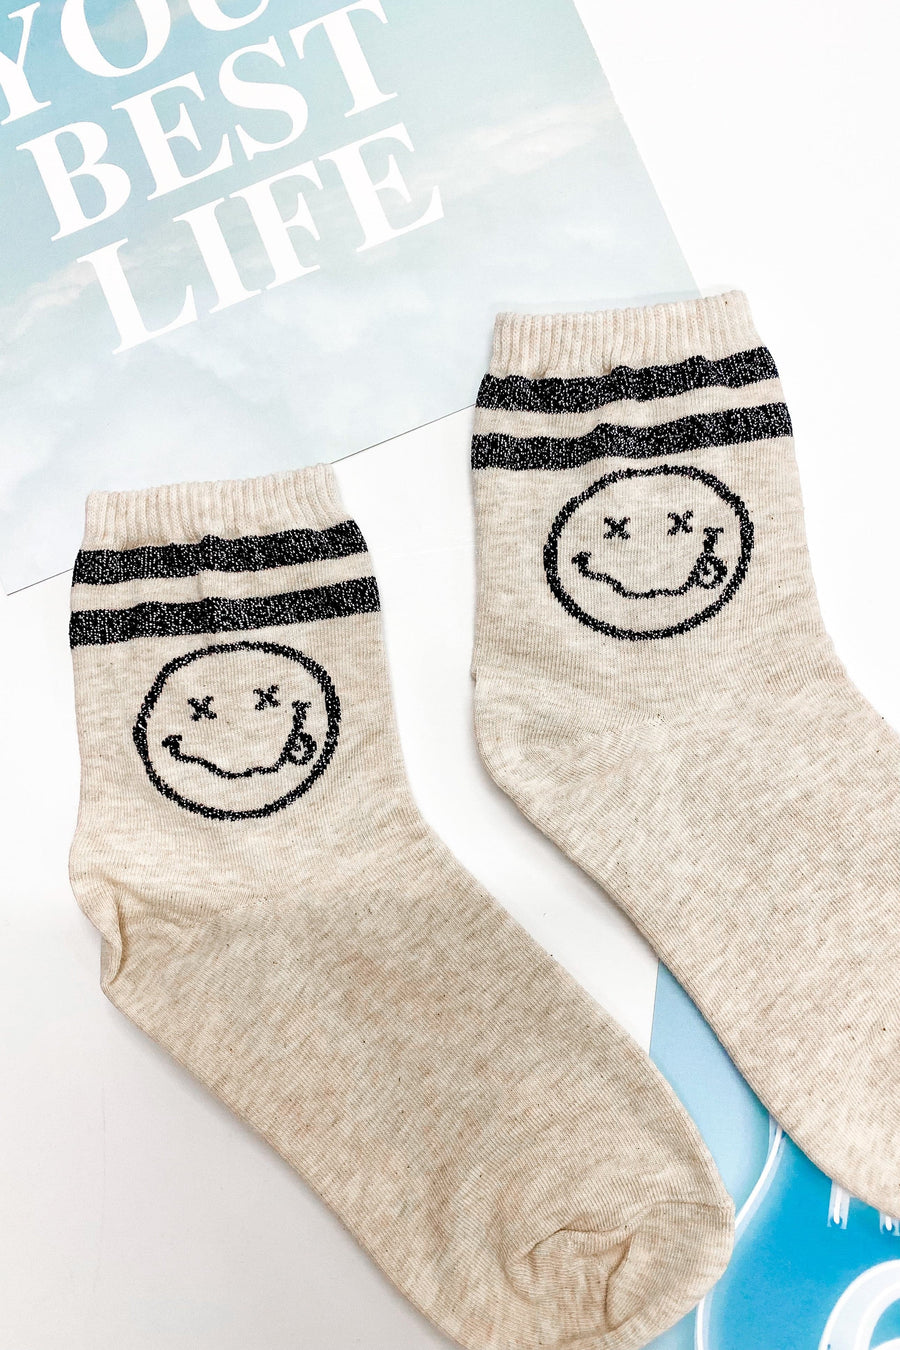  In Your Face Smiley Socks - FINAL SALE - kitchencabinetmagic